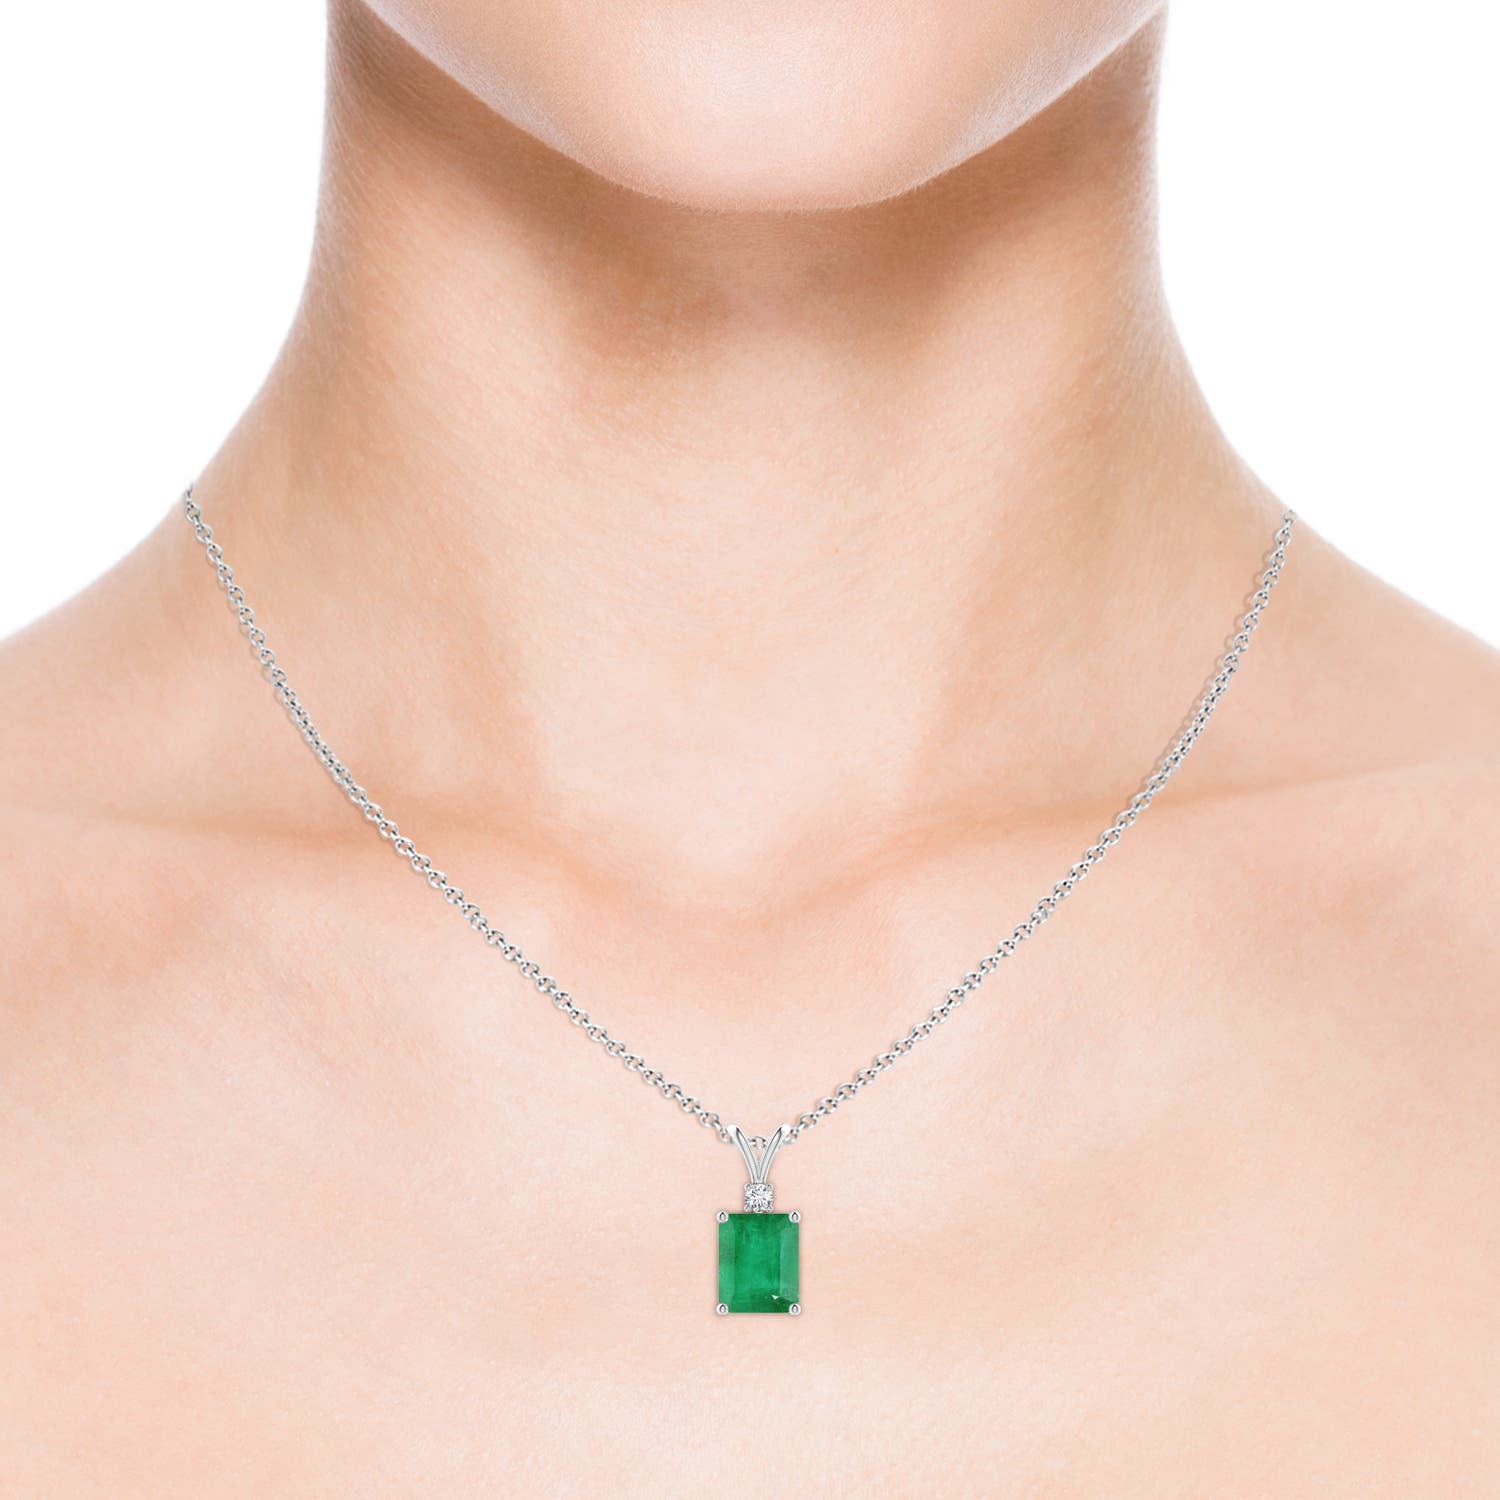 A - Emerald / 2.96 CT / 14 KT White Gold